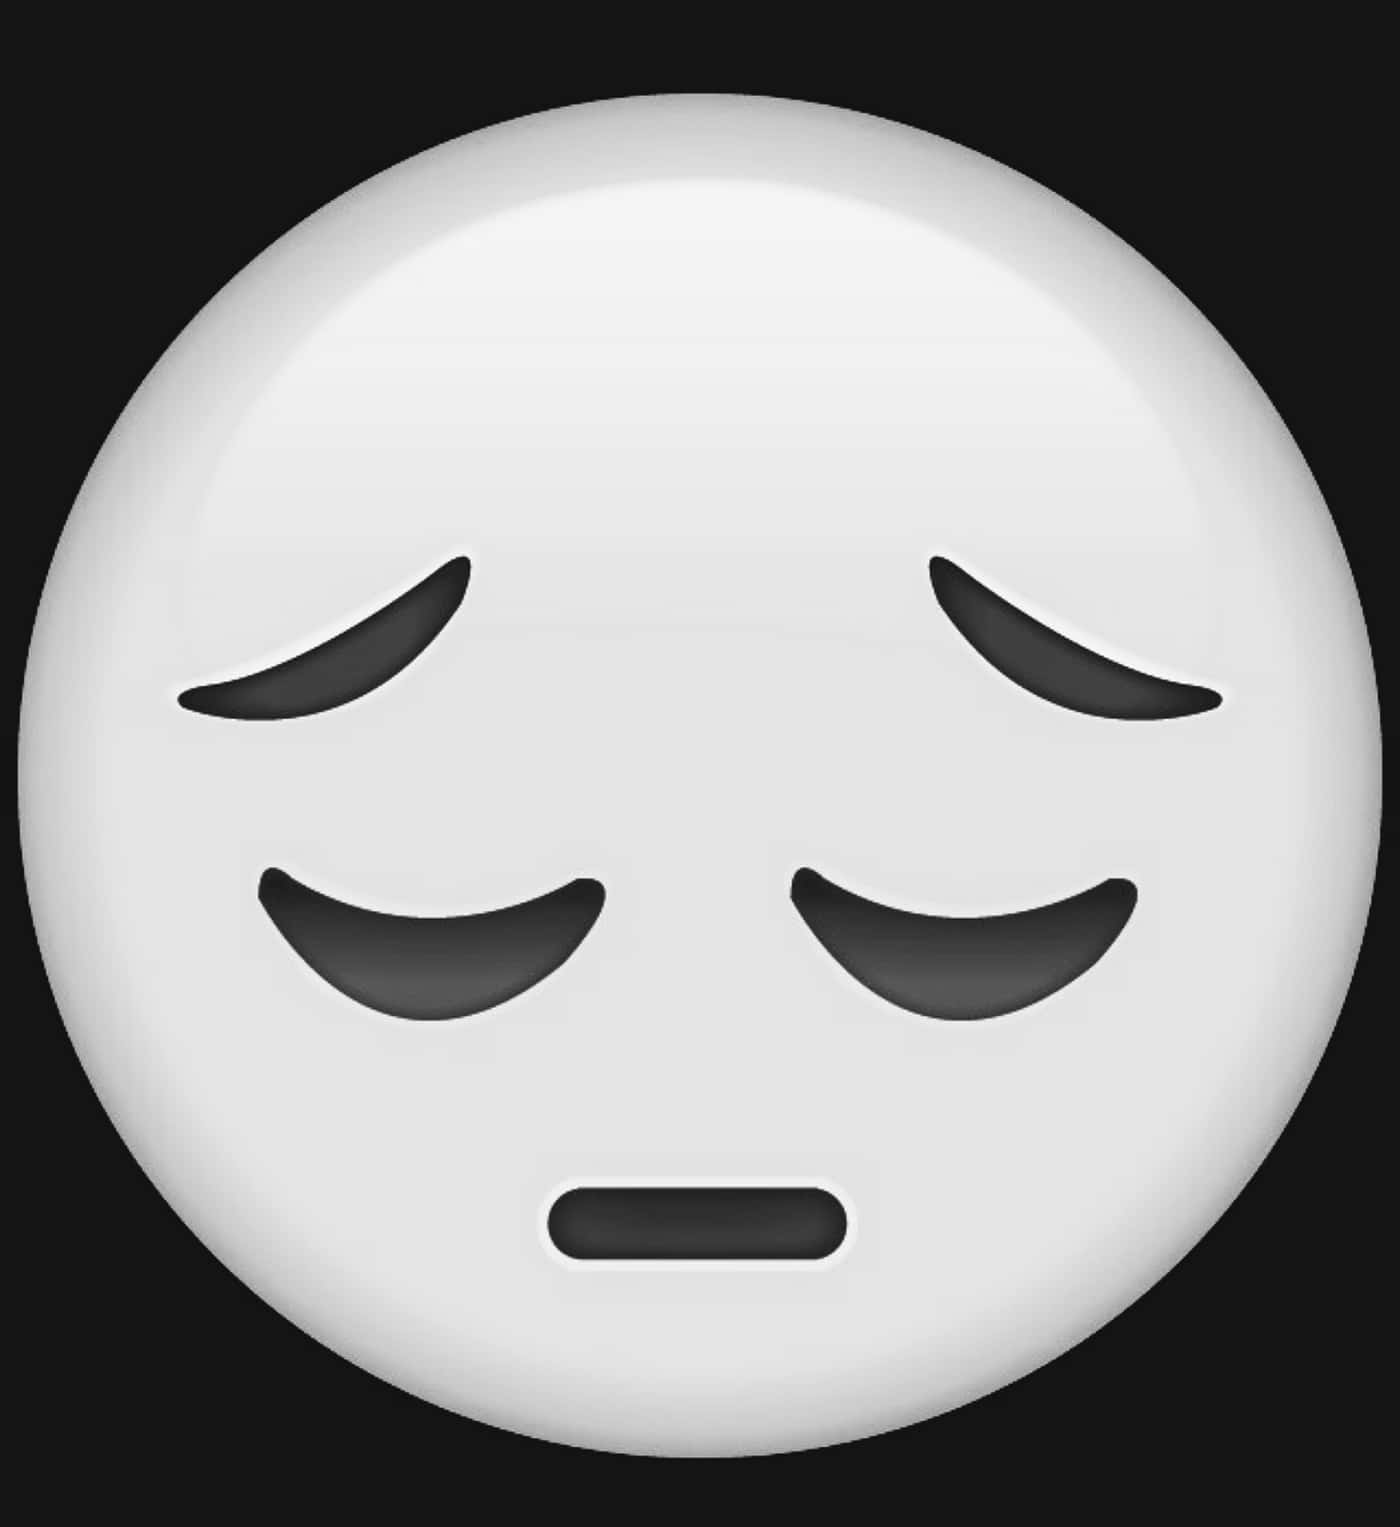 A White Emoticion With Eyes Closed